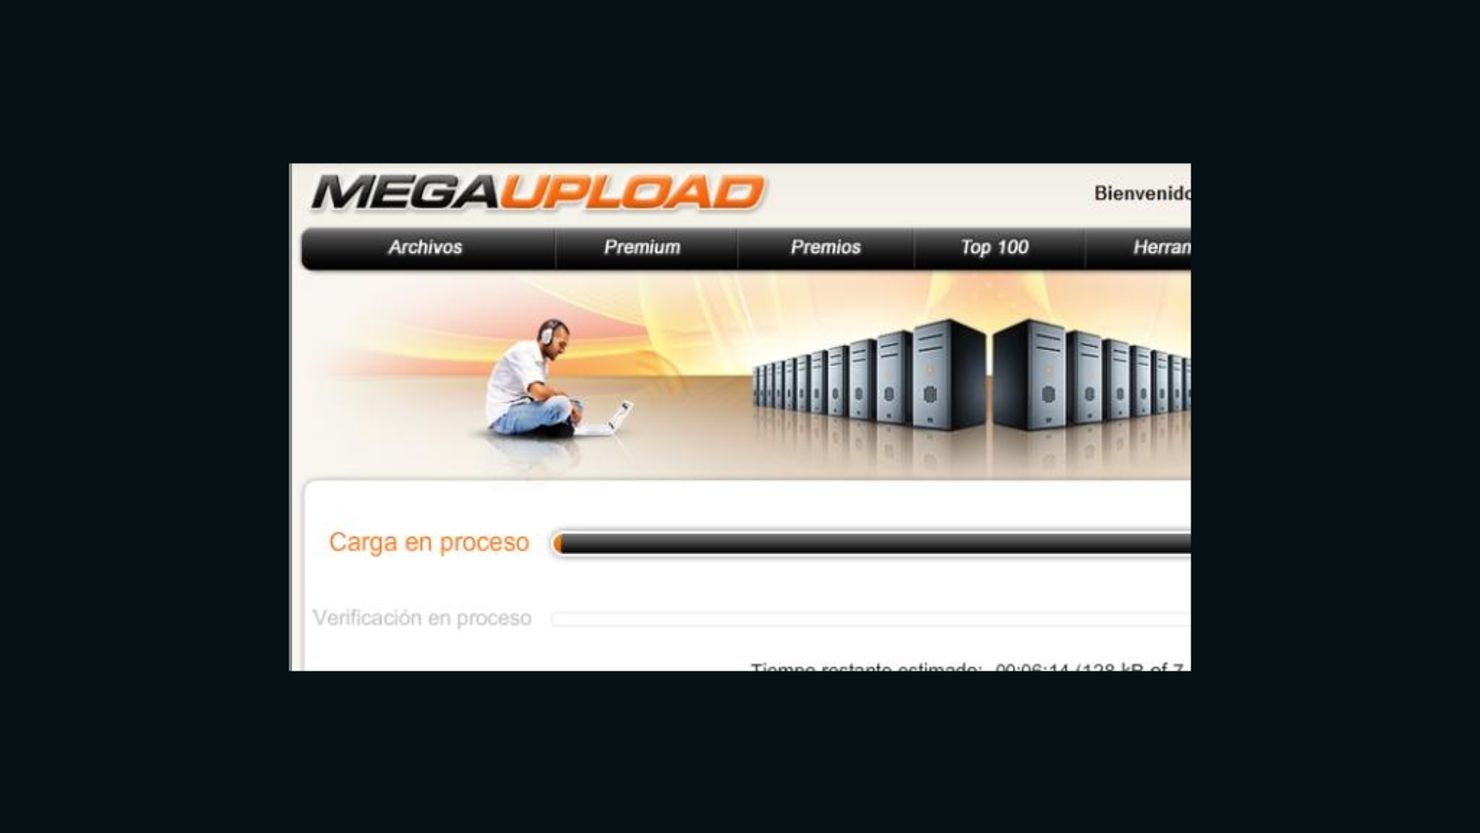 Megaupload.com and Megavideo.com allegedly reproduced copyrighted works from third-party websites.